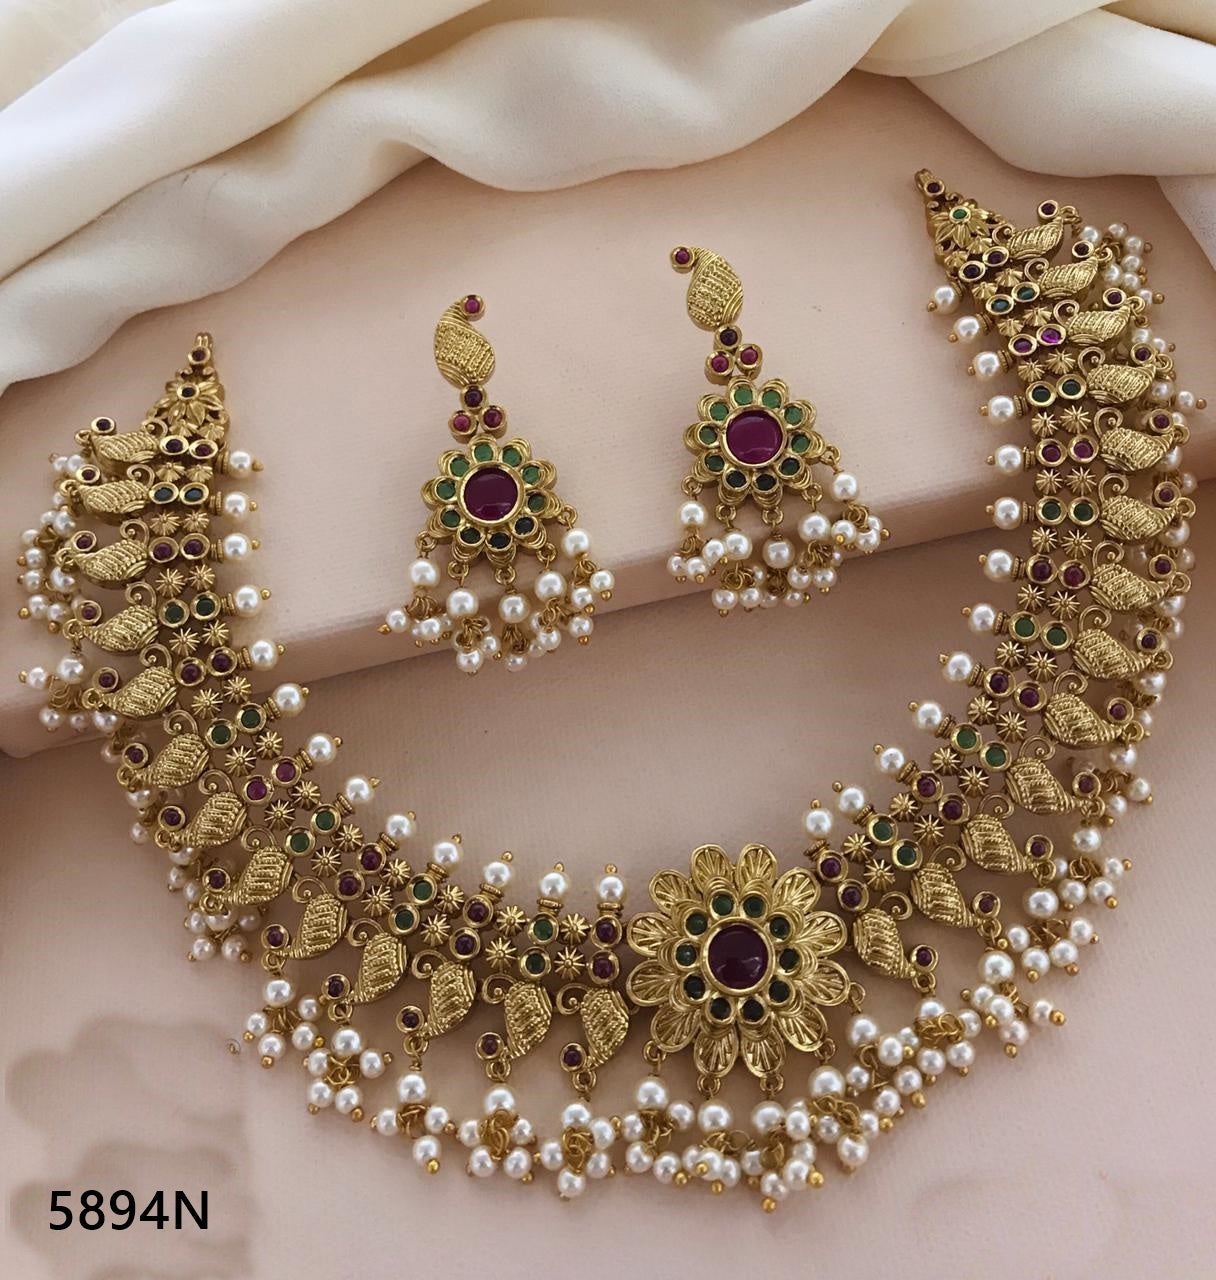 Premium Gold Finish High Quality Short Necklace Set with AD stones for all occasions 5894N